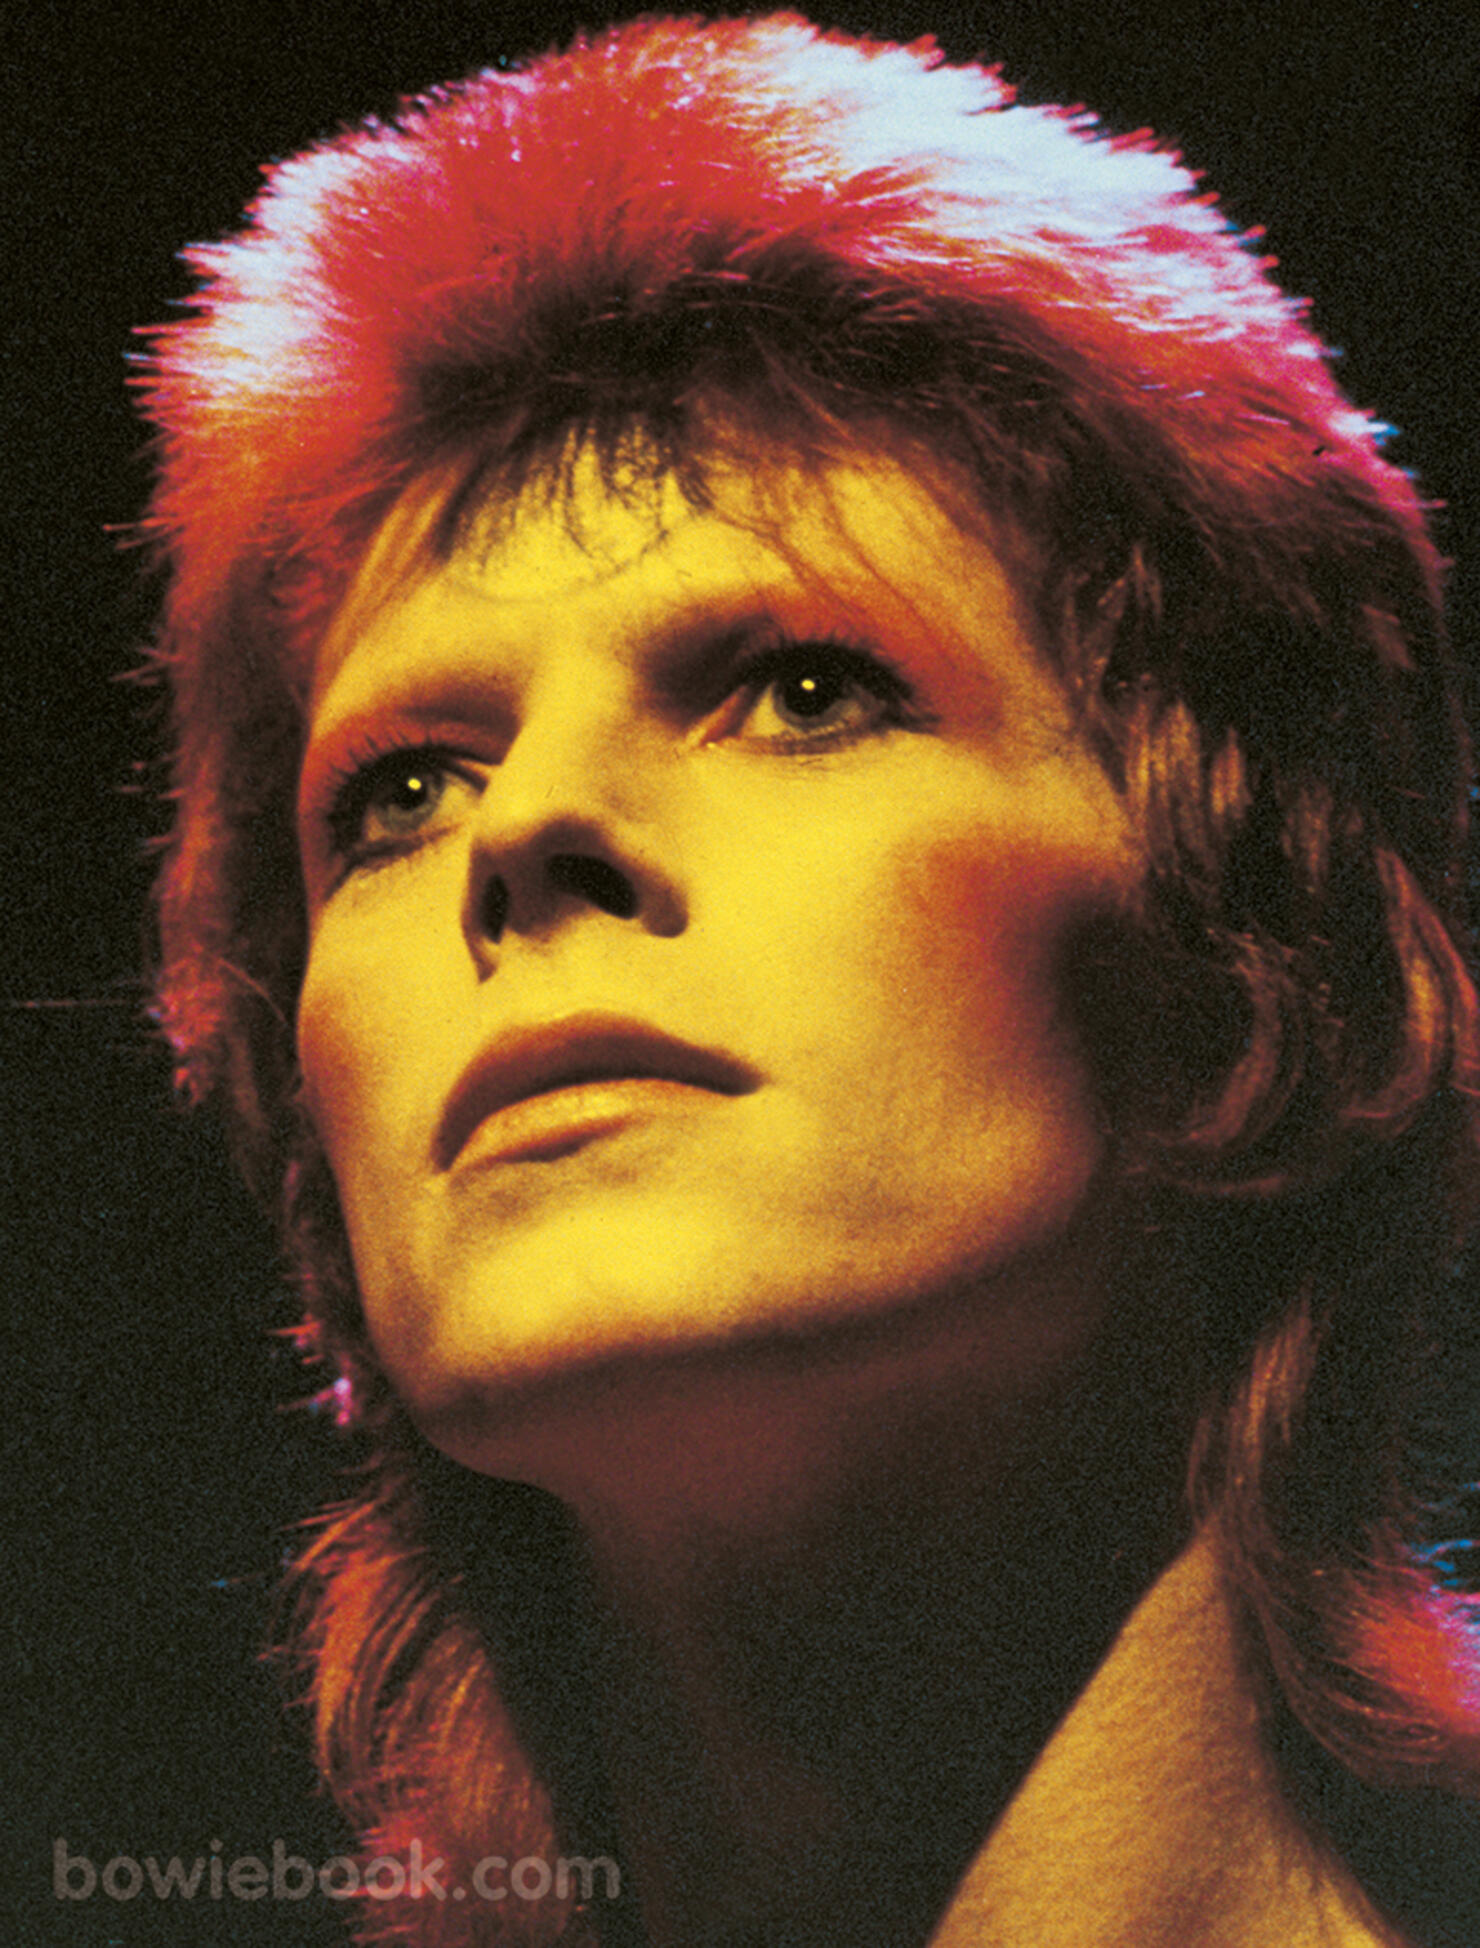 David Bowies Ziggy Stardust Biography Gets Anniversary Edition Reissue Iheart 8630